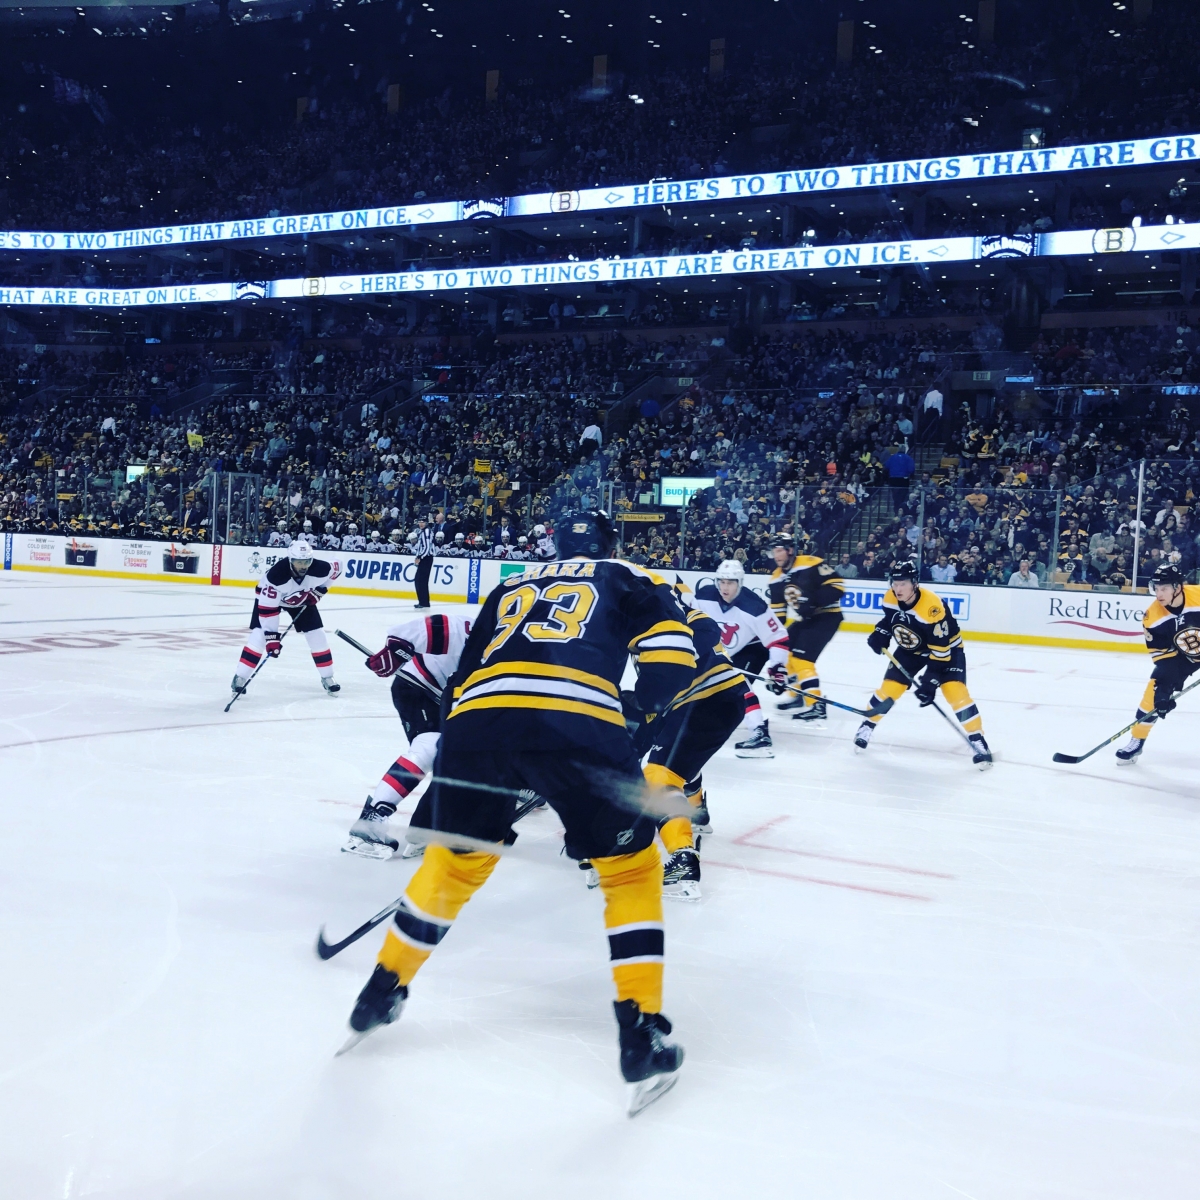 Bruins Game - View from seats